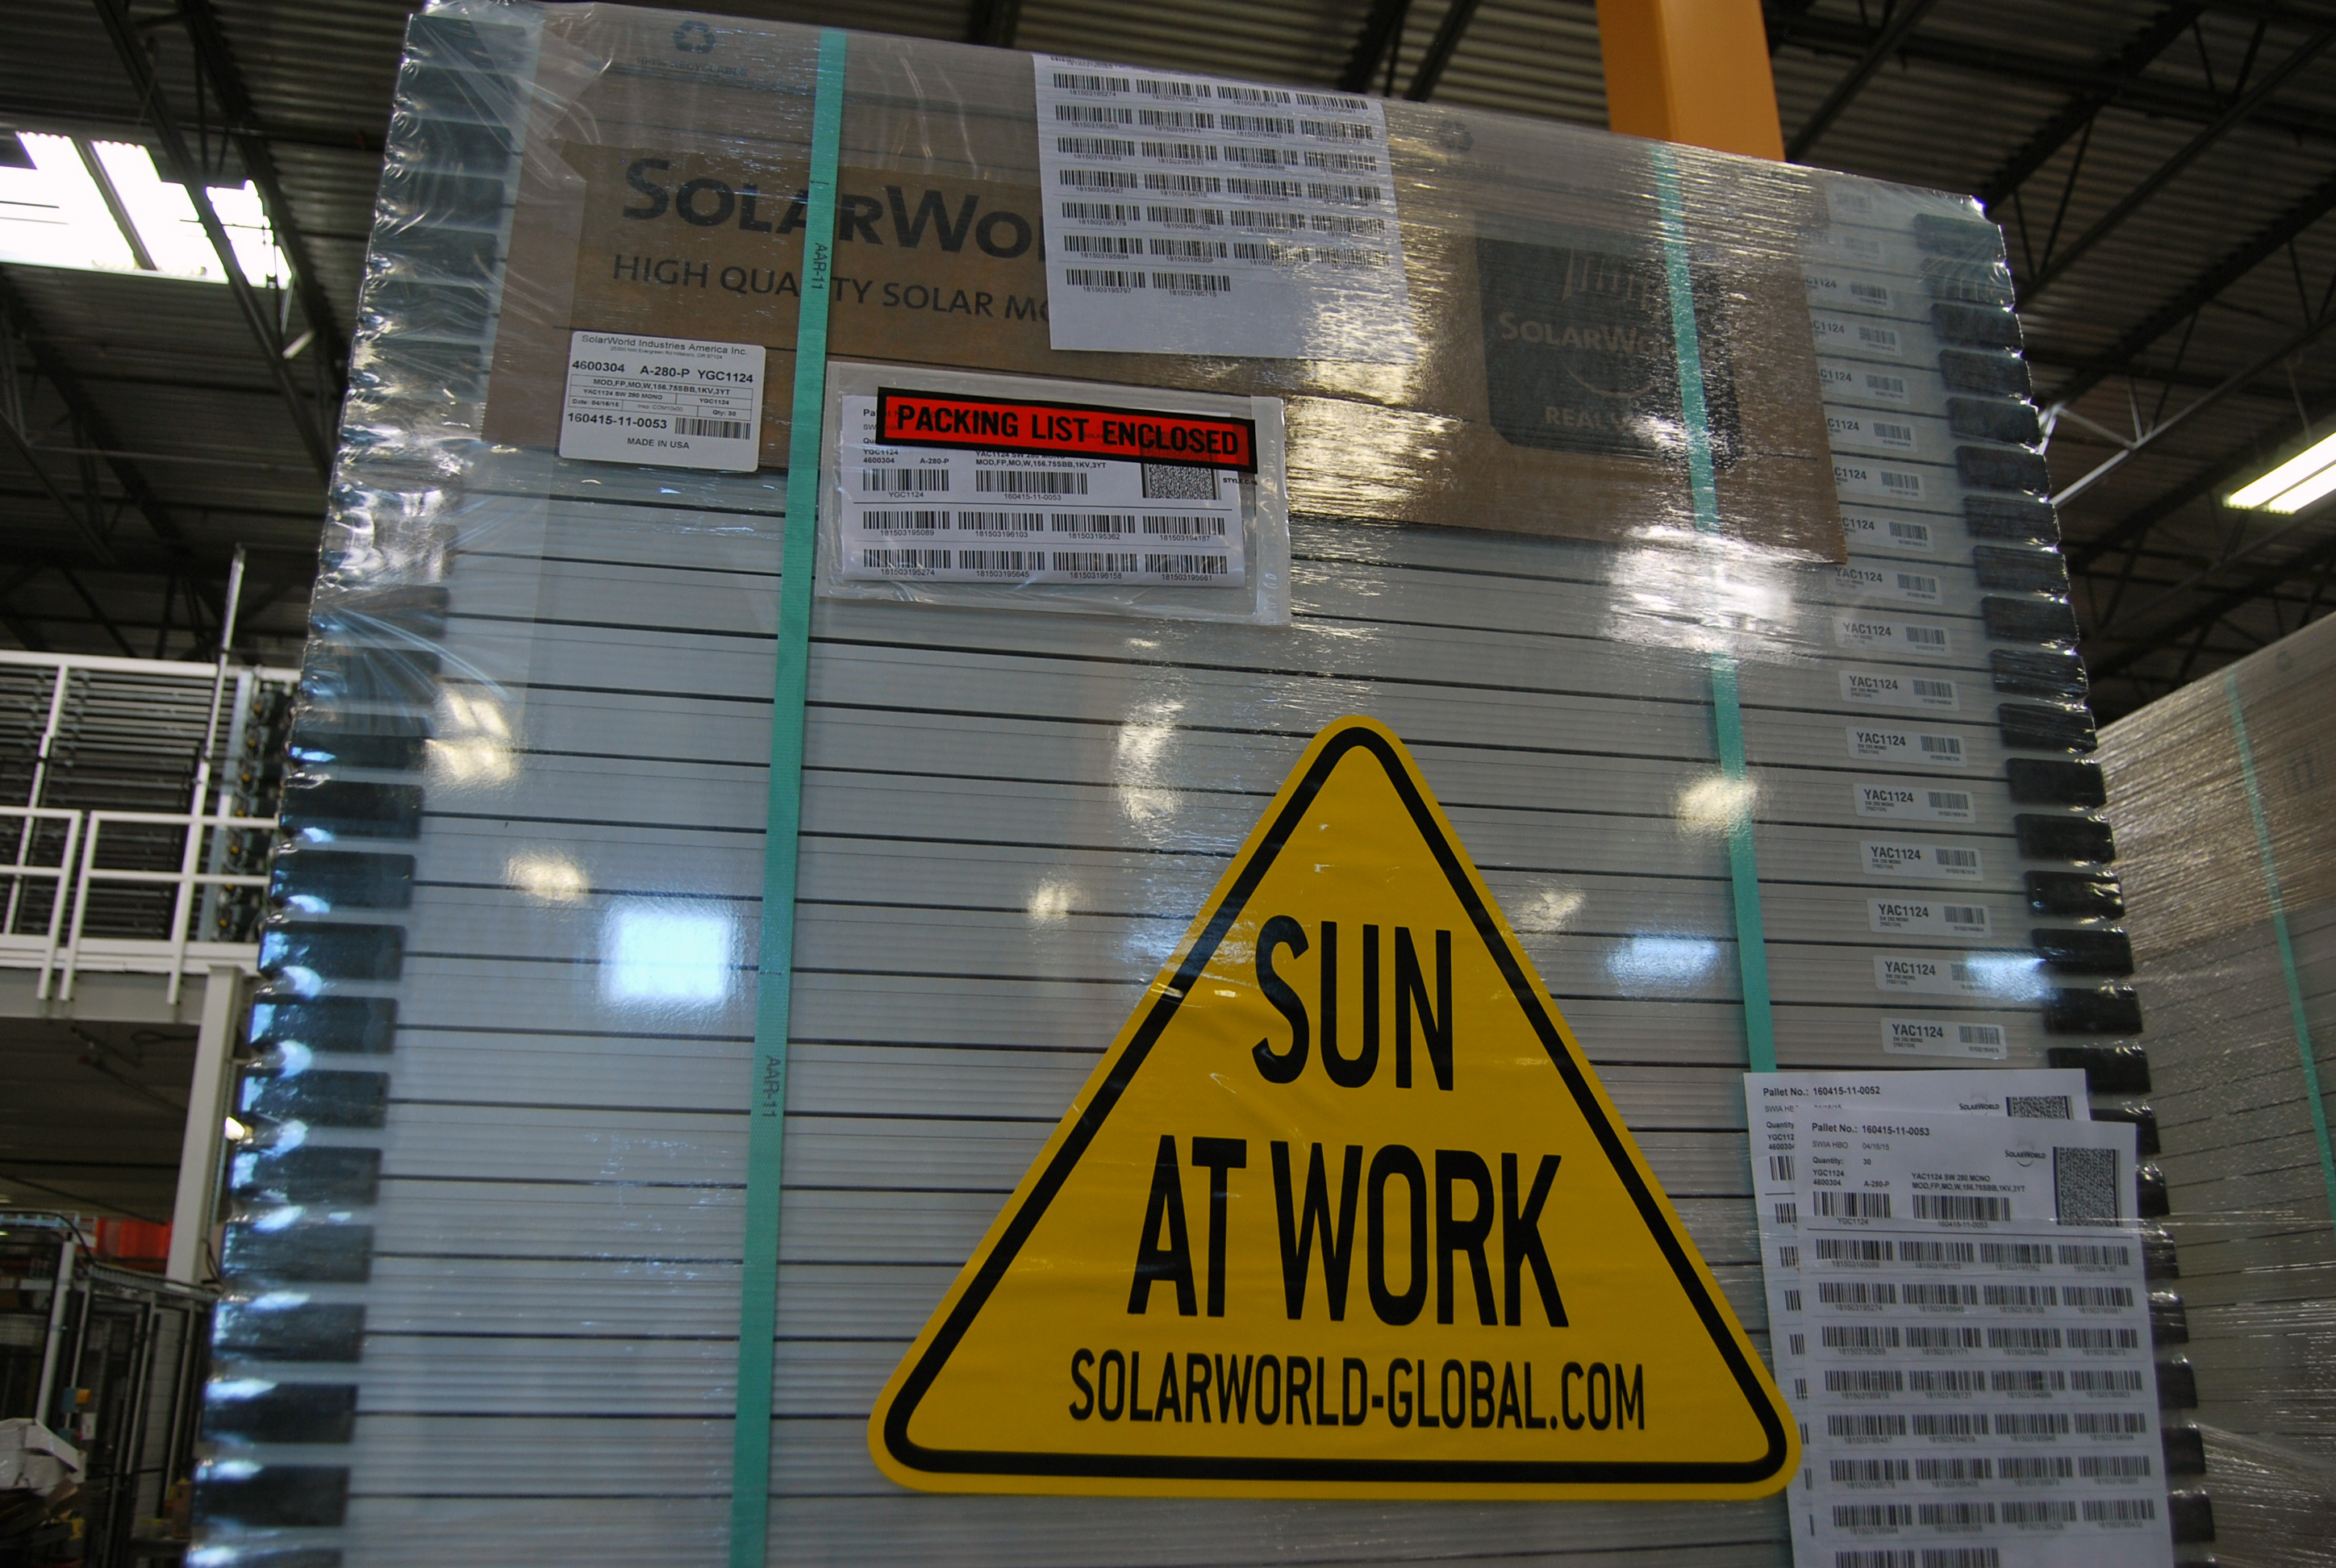 Here comes the sun:  The final product packaged and ready to be shipped. Photo by Ed Colford